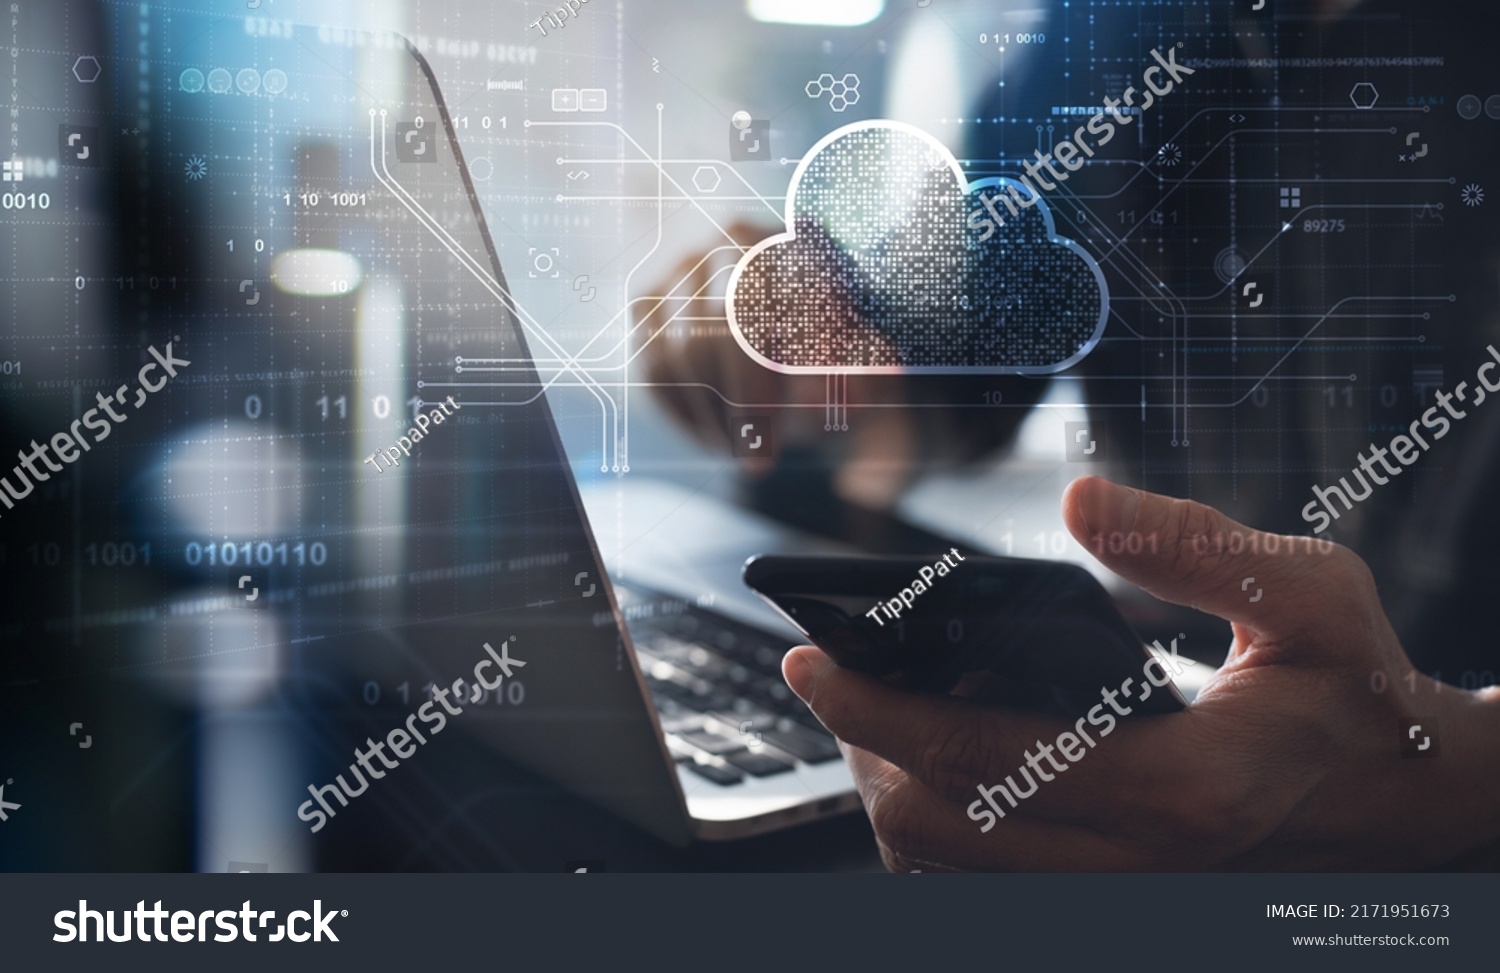 Cloud technology. Data storage and backup. Networking and internet service concept. Man using laptop computer and mobile phone with cloud computing diagram. #2171951673